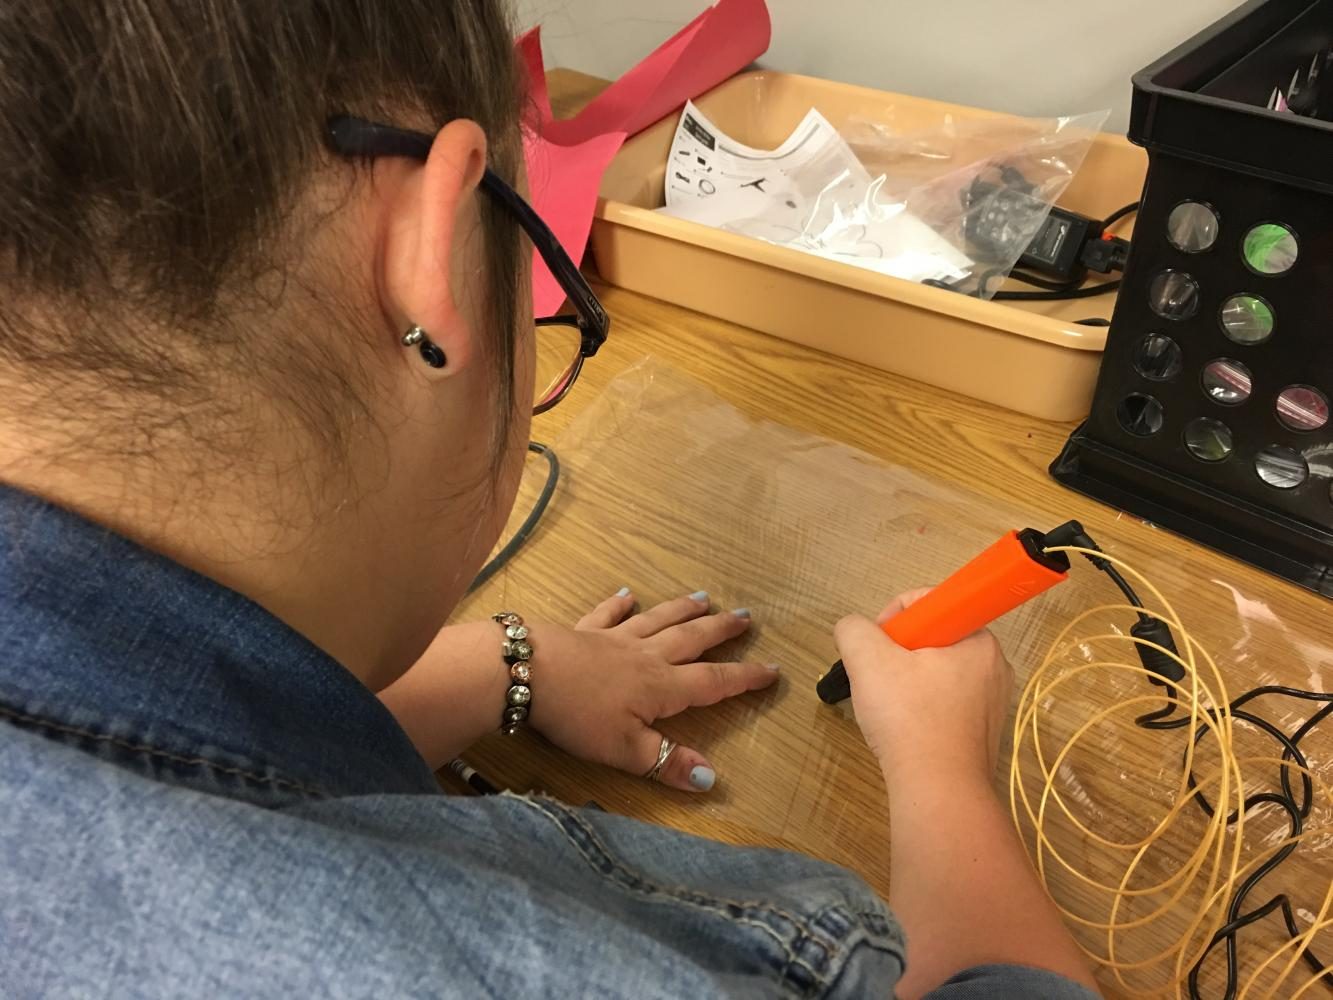 Senior Ali Beasley works with the new 3D pen in the markerspace.